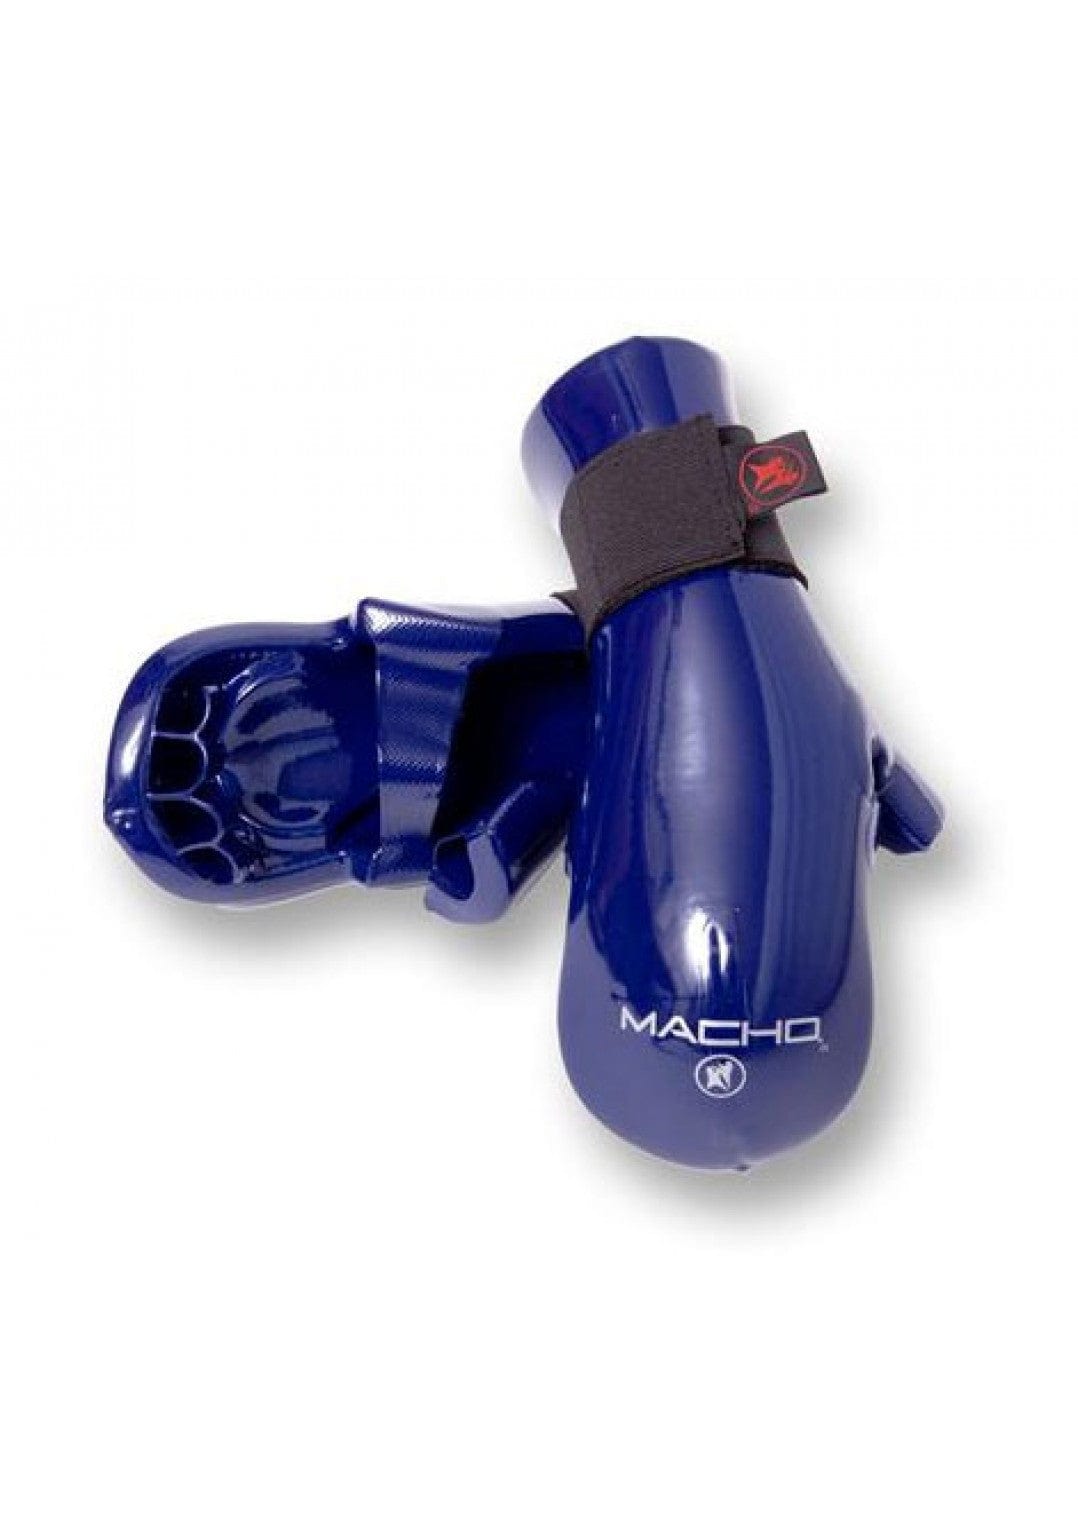 Eclipse Martial Art Supplies sporting goods blue / child s MACHO DYNA PUNCH martial arts sparring gloves